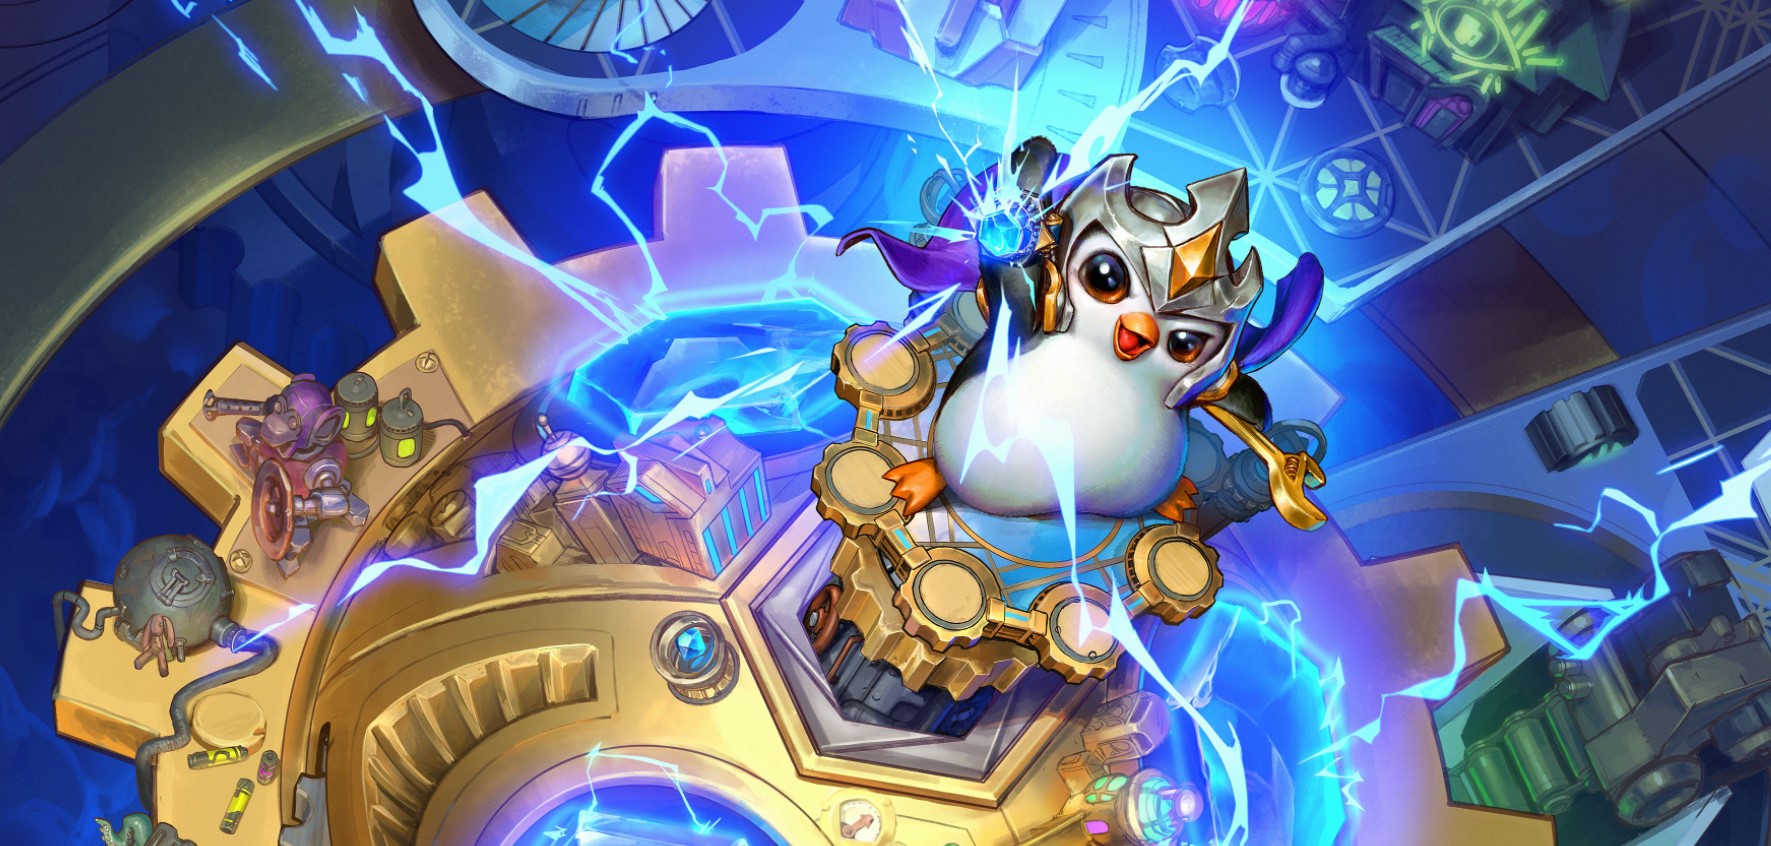 Gizmos and Gadgets: New TFT Set 6 Revealed (All New Champions, Traits, and Hextech Augments)